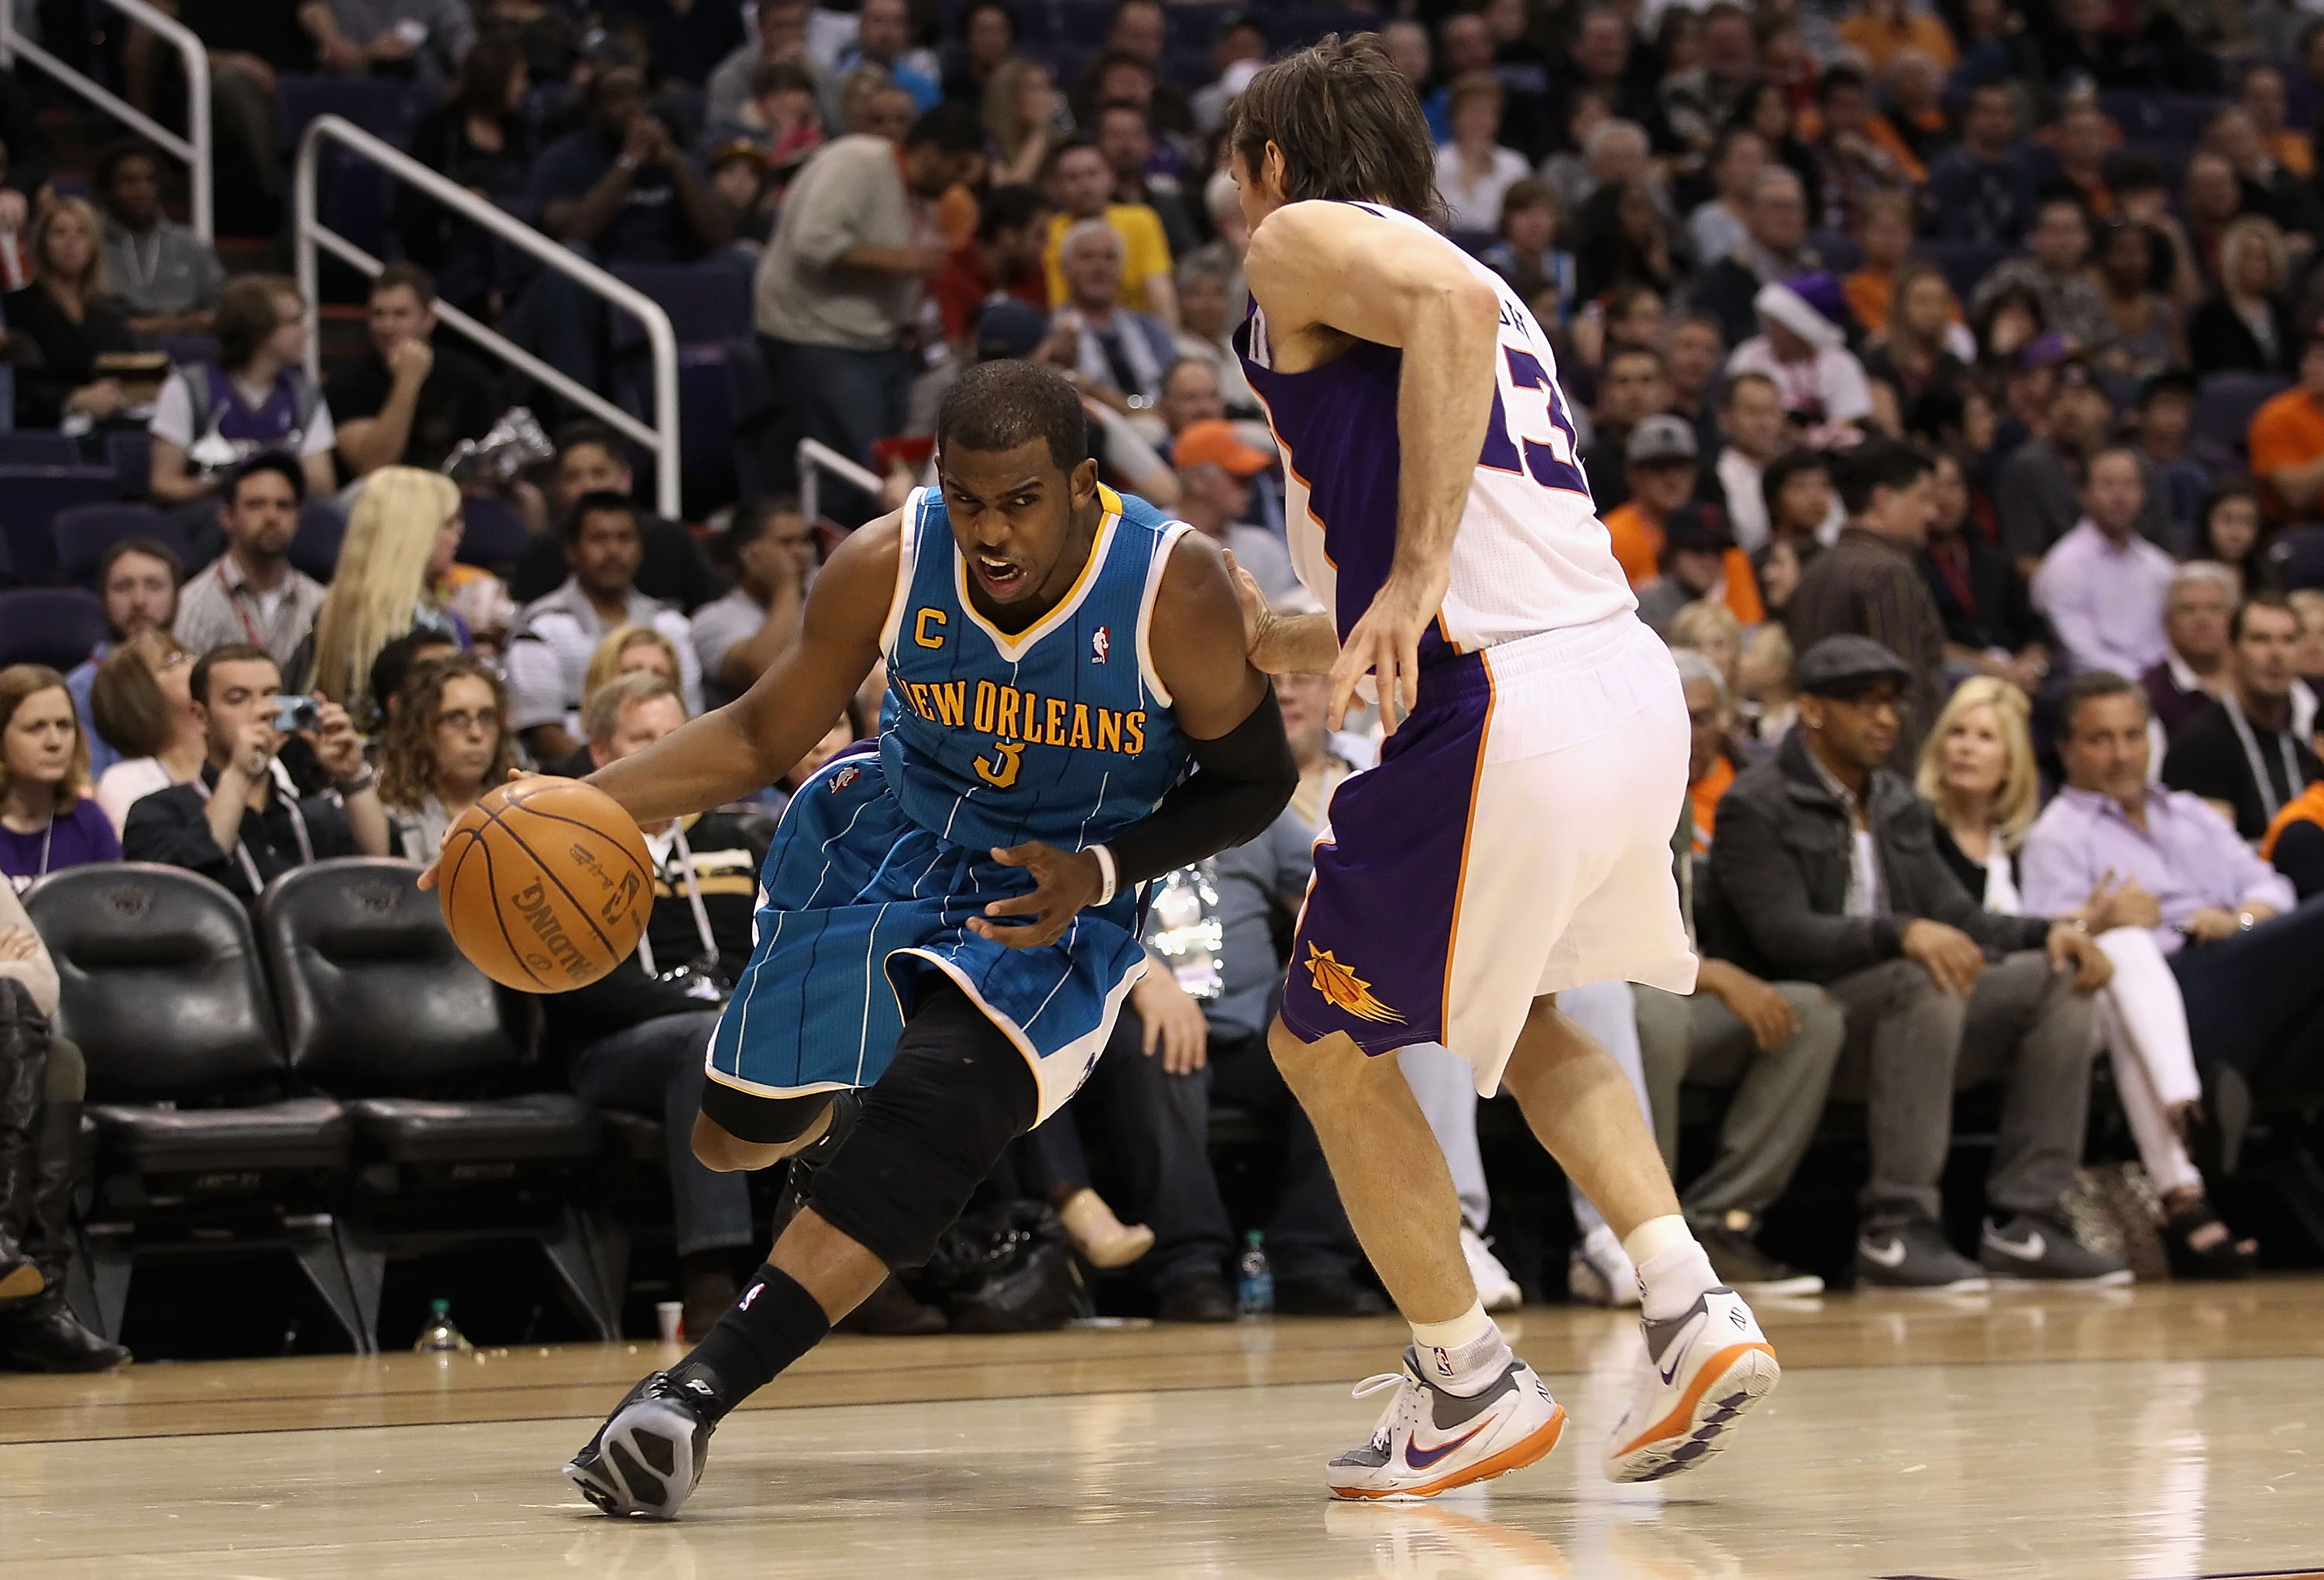 PHOENIX, AZ - JANUARY 30:  Chris Paul #3 of the New Orleans Hornets handles the ball during the NBA game against  the Phoenix Suns at US Airways Center on January 30, 2011 in Phoenix, Arizona.  The Suns defeated the Hornets 104-102. NOTE TO USER: User exp